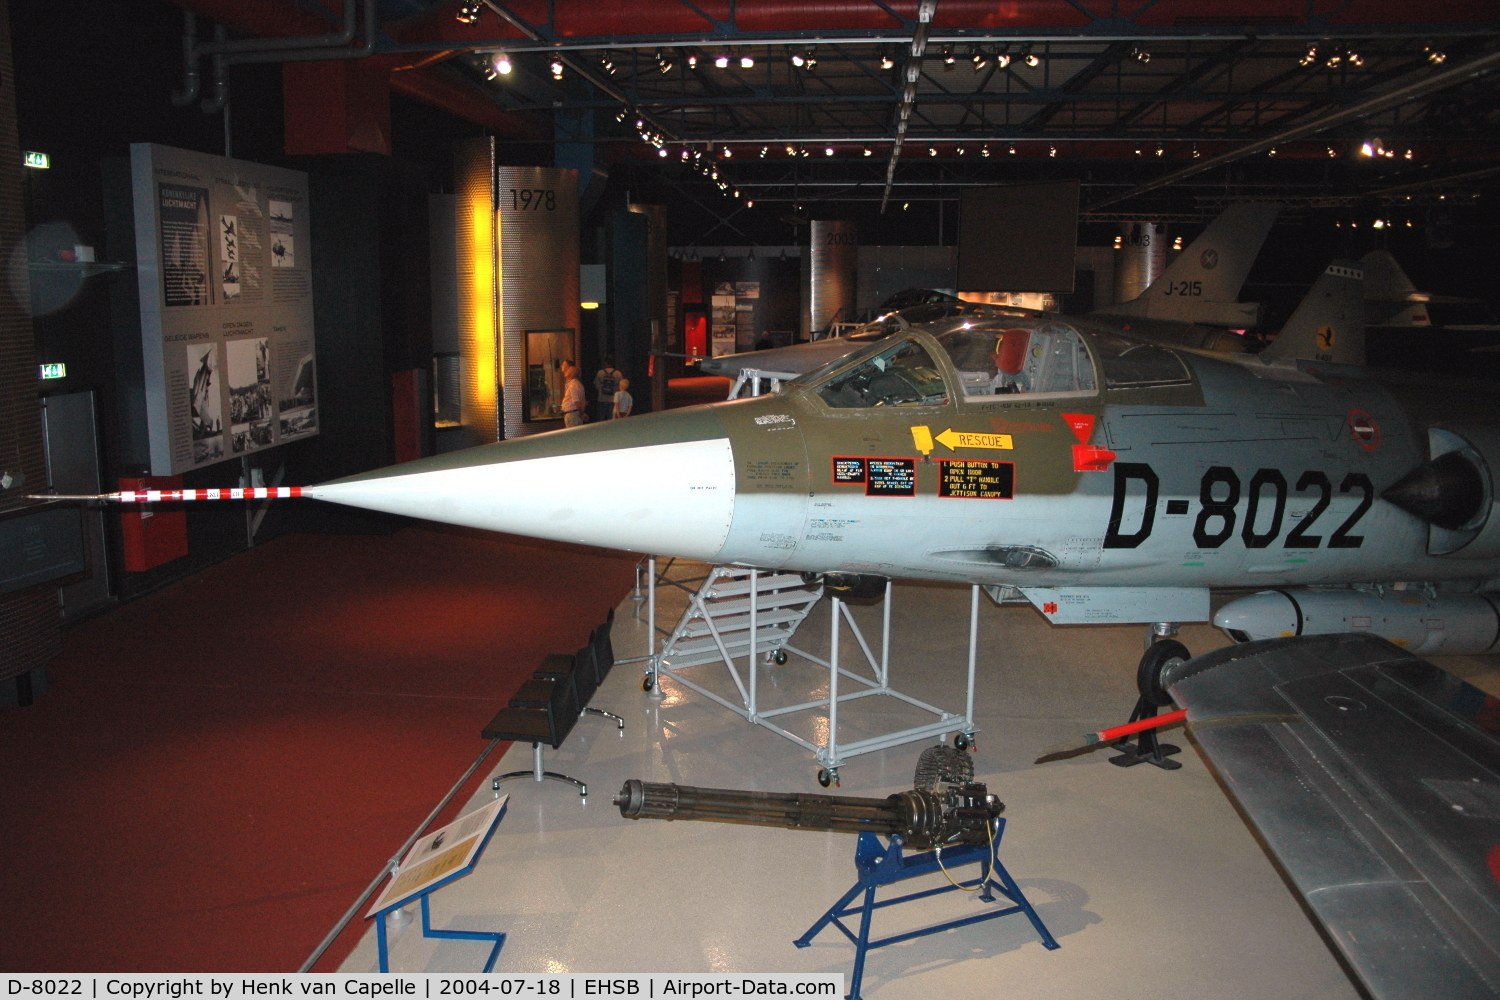 D-8022, Lockheed F-104G Starfighter C/N 683-8022, Lockheed F-104G Starfighter preserved in the Military Aviation Museum in the Netherlands. Note: Orpheus reconnaissance pod under the fuselage.